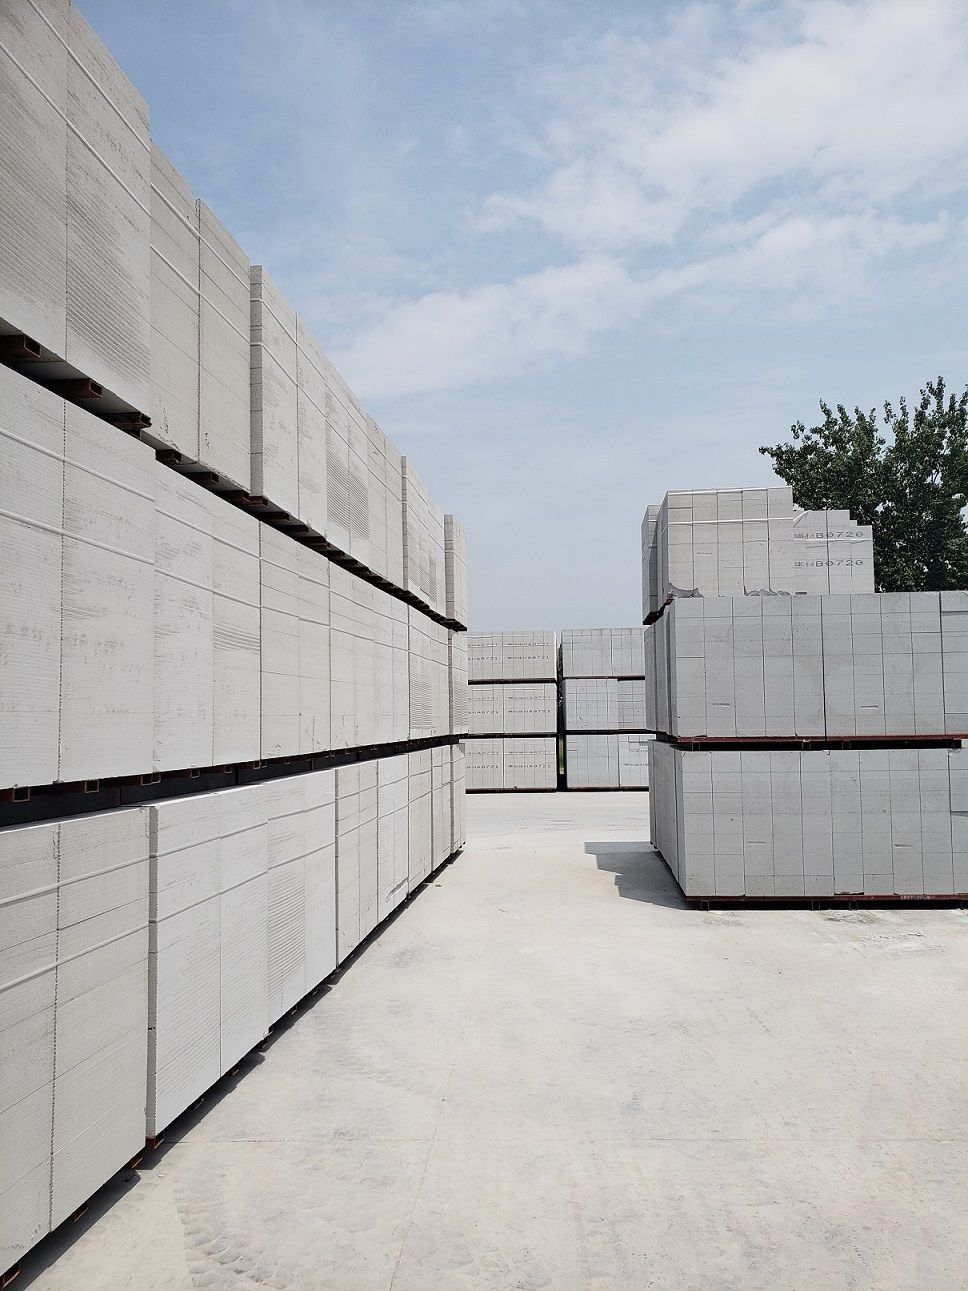 Jining Jiaxiangautoclaved aerated concrete blockManufacturers supply gap is difficult to make up